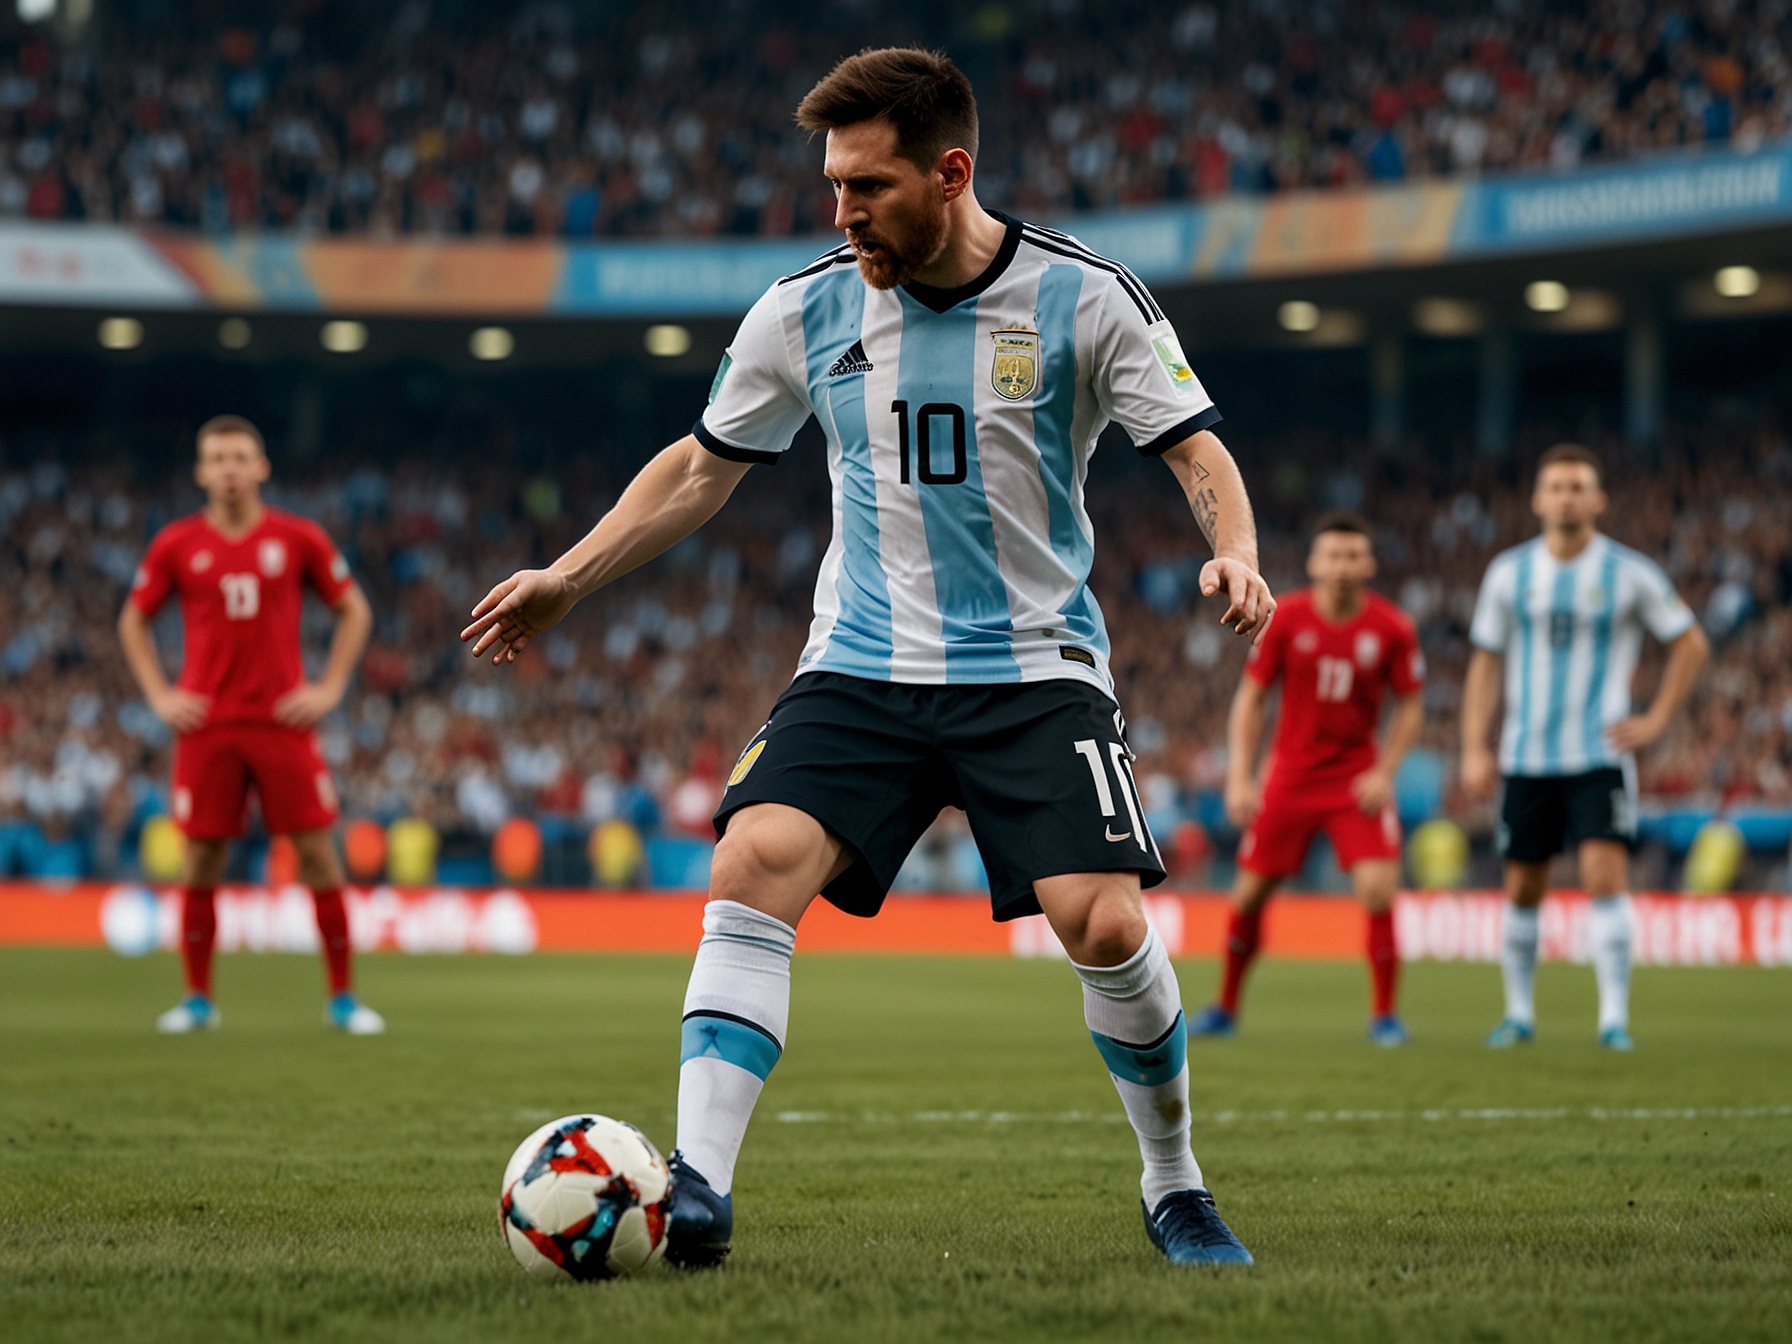 Lionel Messi takes a free-kick during Argentina's Copa América opener against Canada. The crowd watches in anticipation as Messi's skillful shot curls into the top corner, breaking the deadlock.